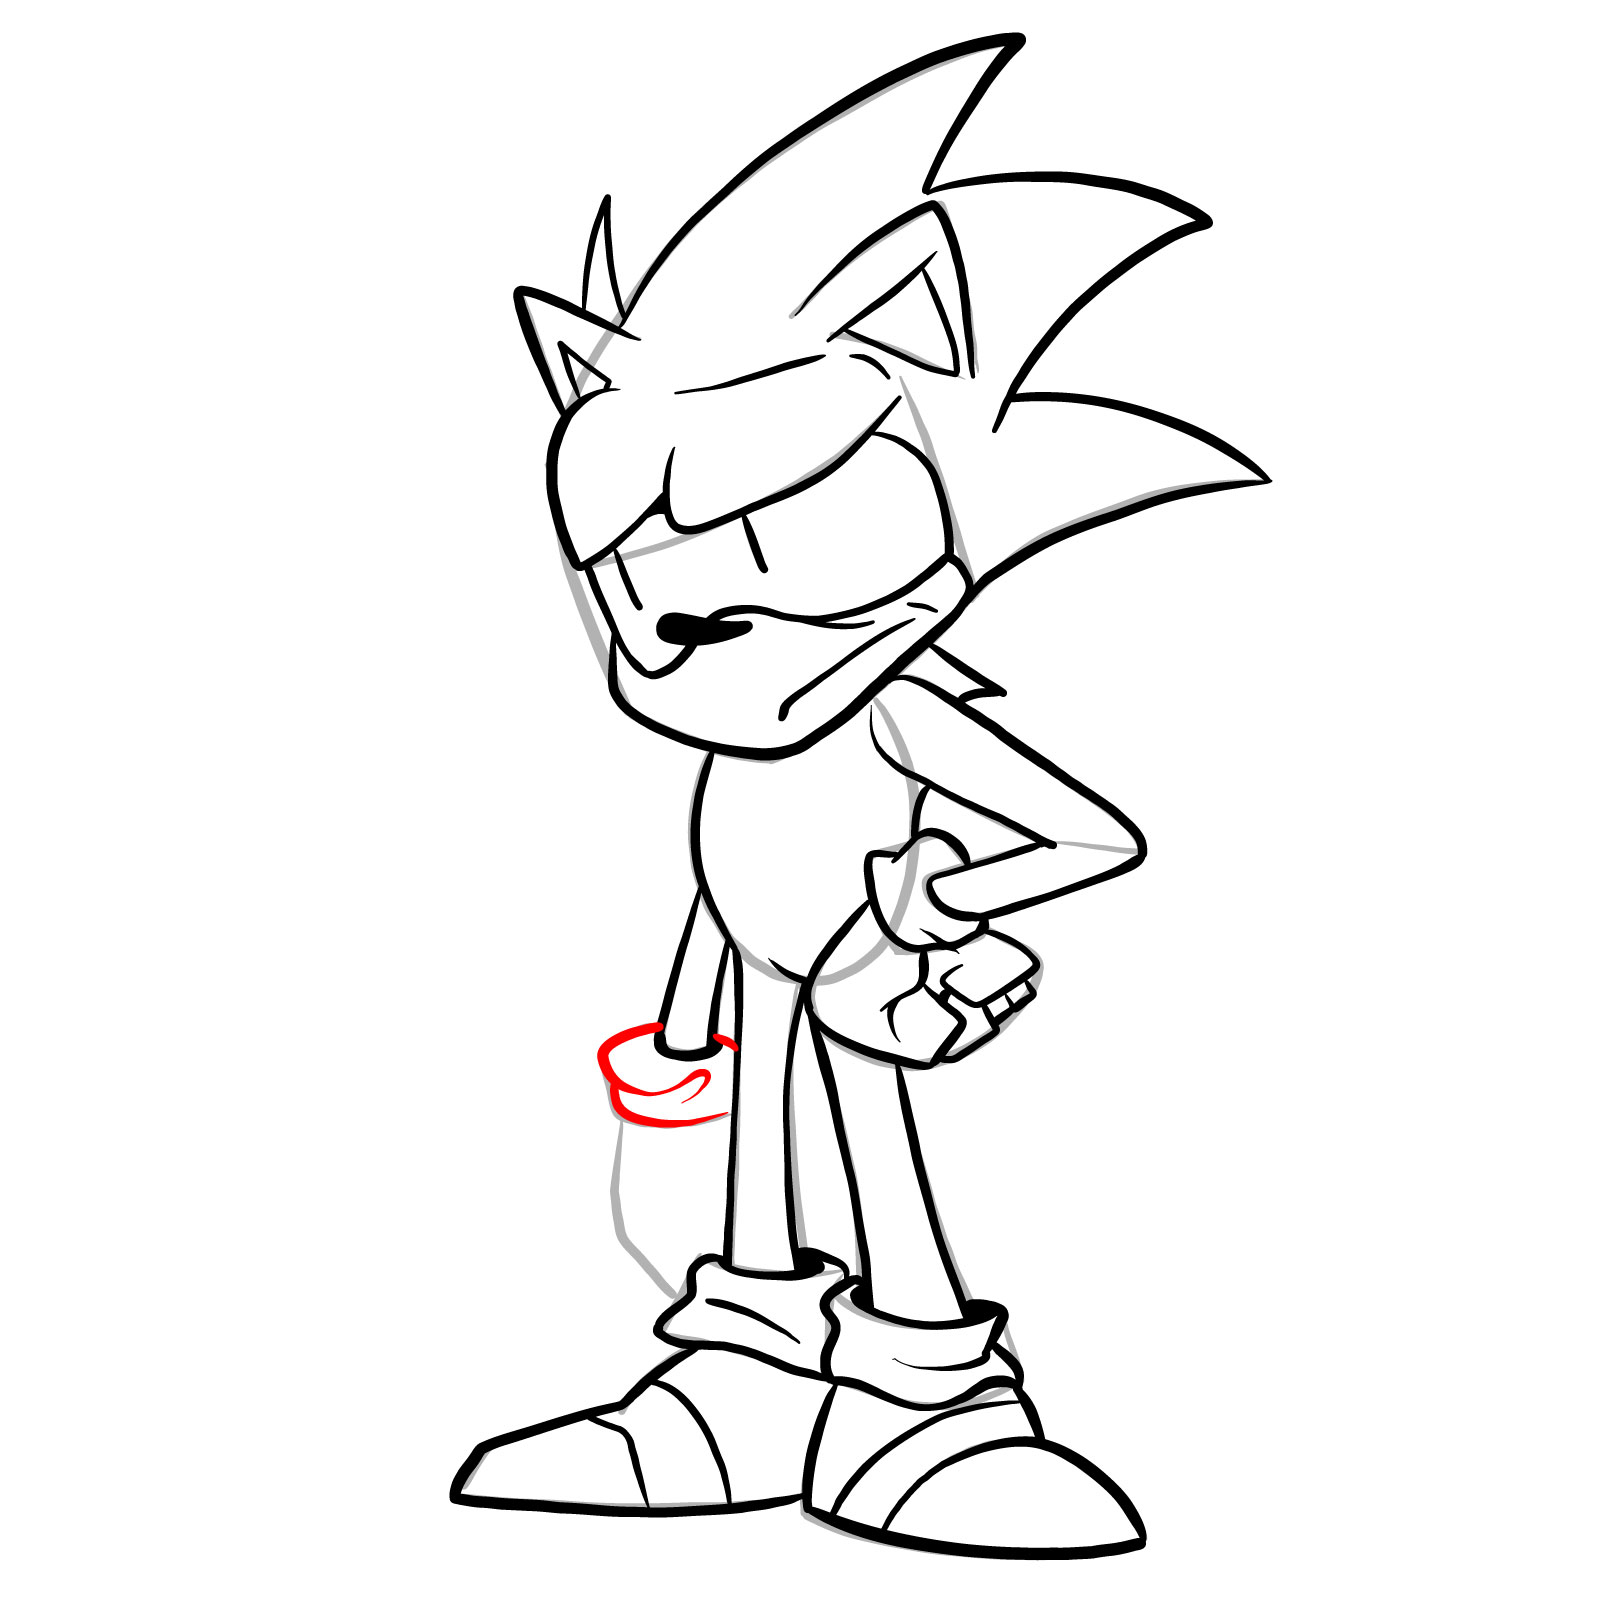 How to draw Sonic - FNF: Secret Histories - step 26